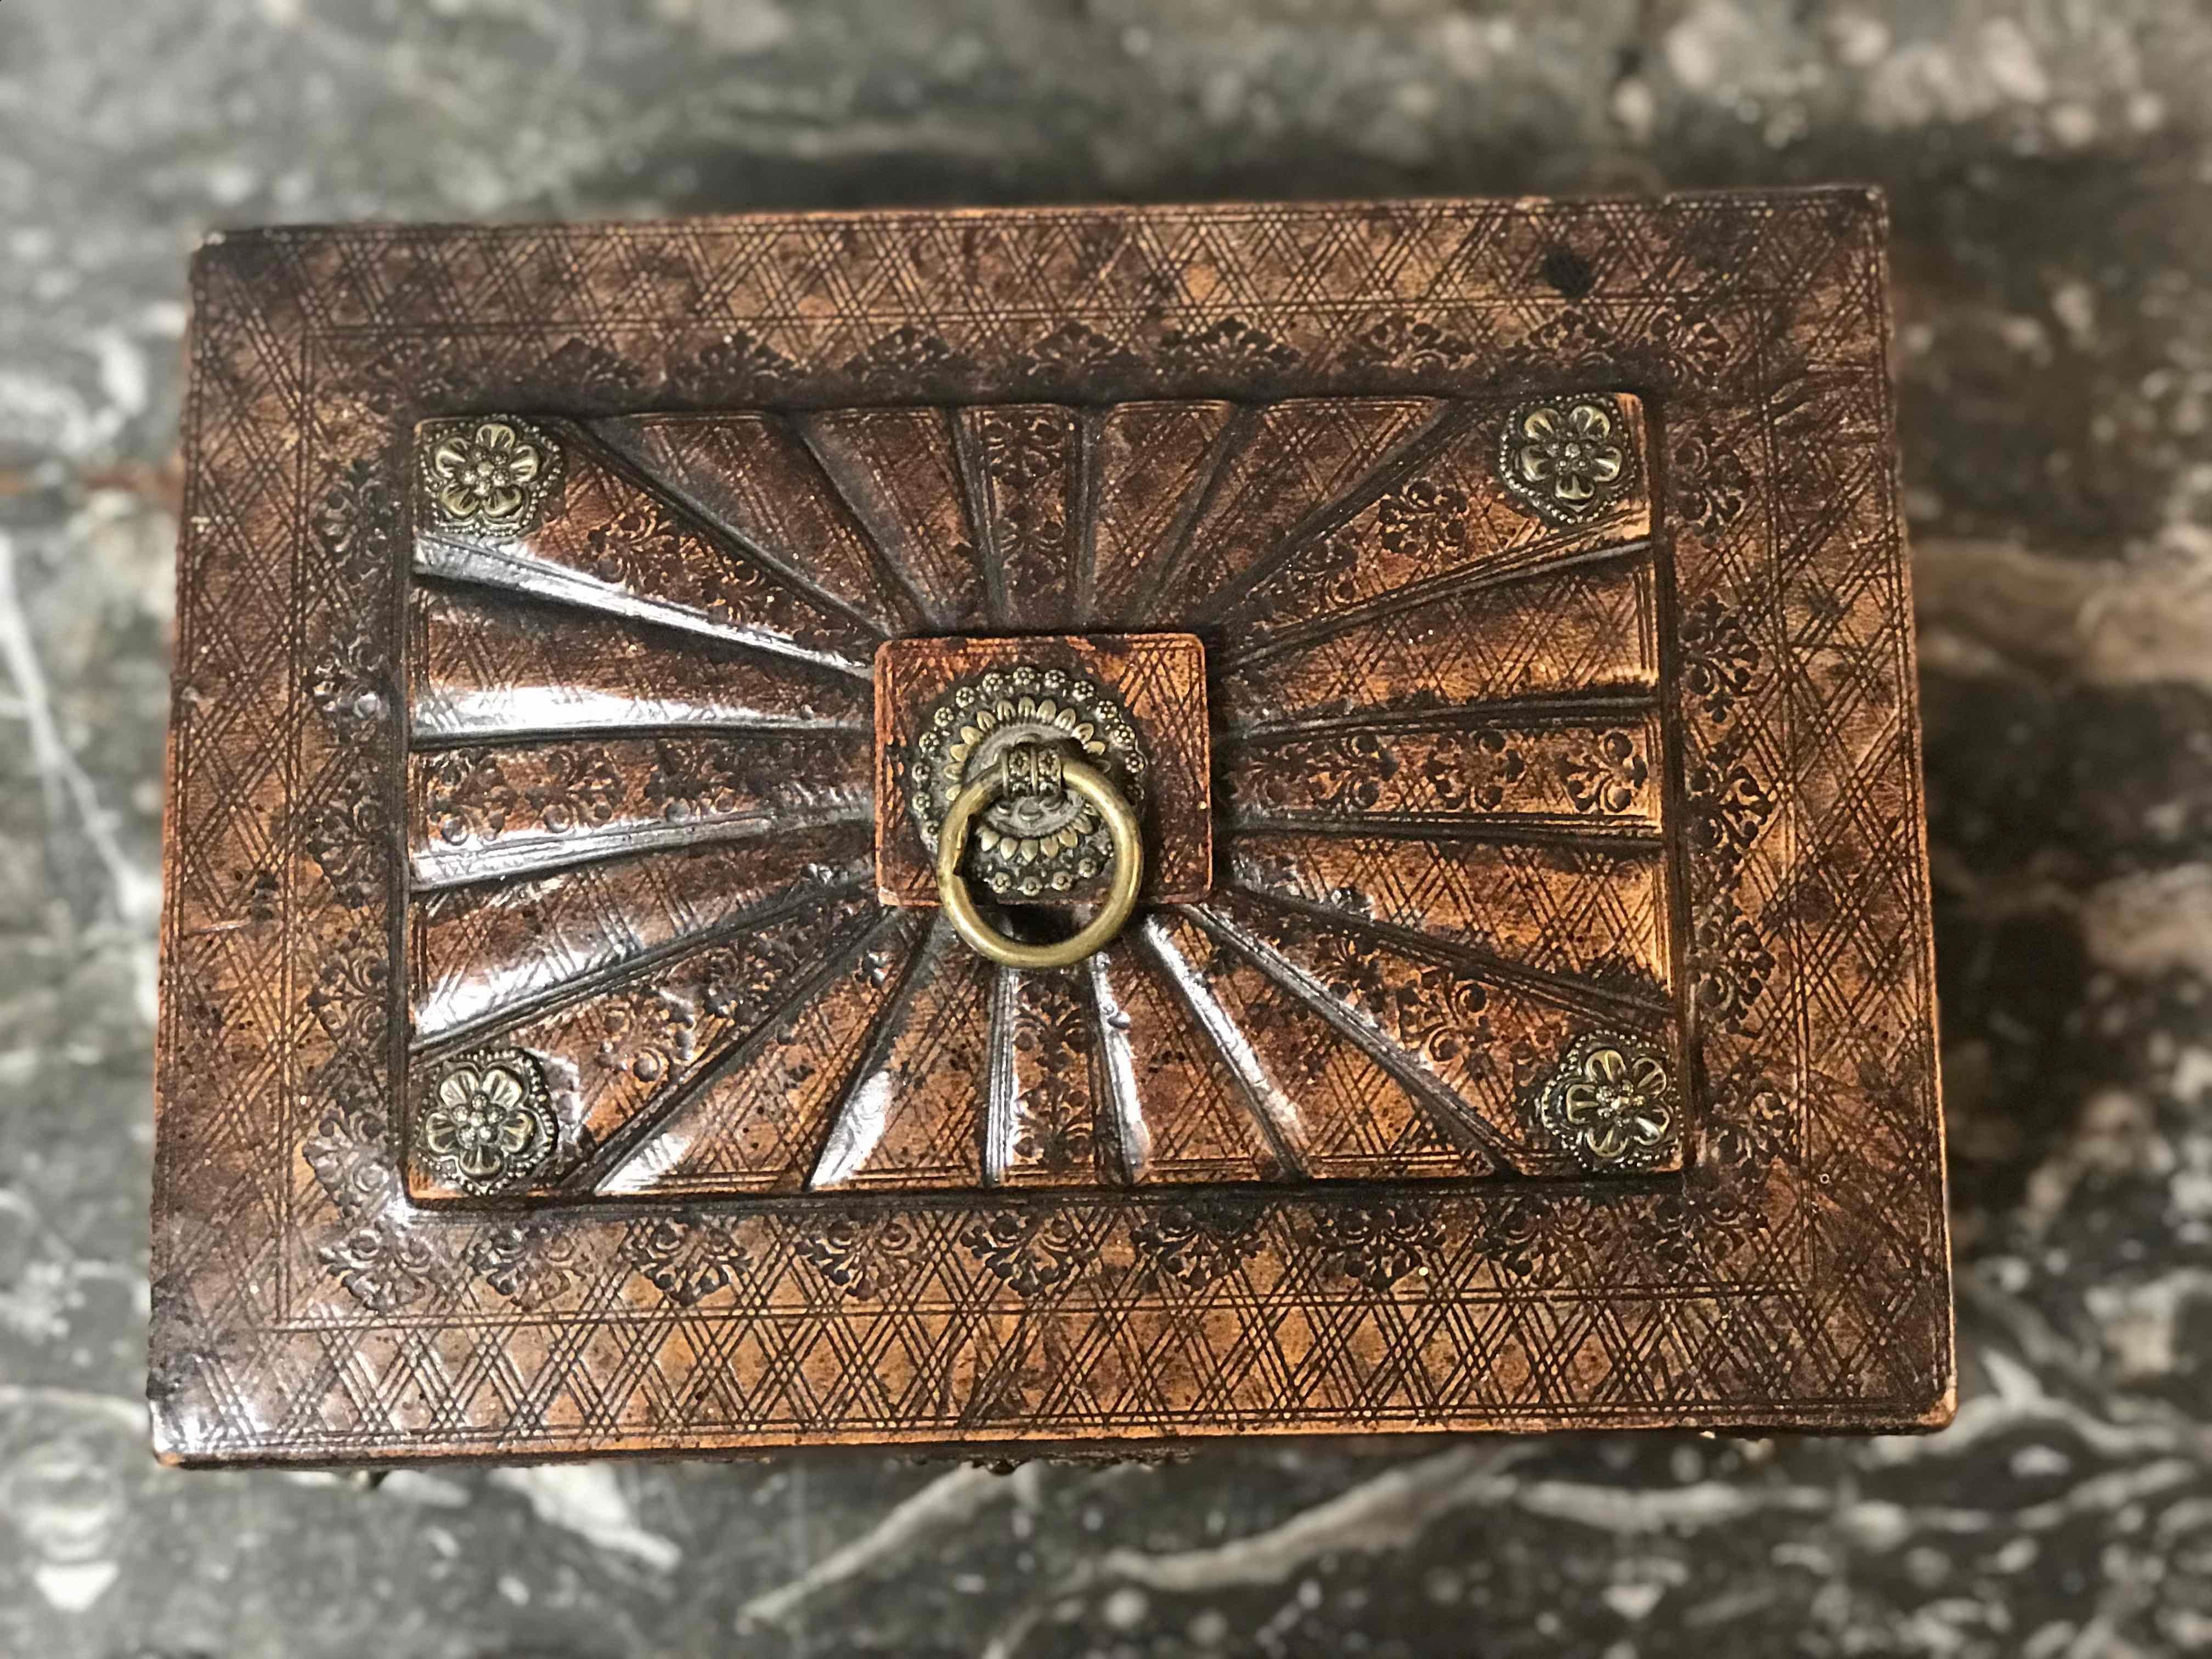 Georgian Leather Decorative Box from 1820s England 